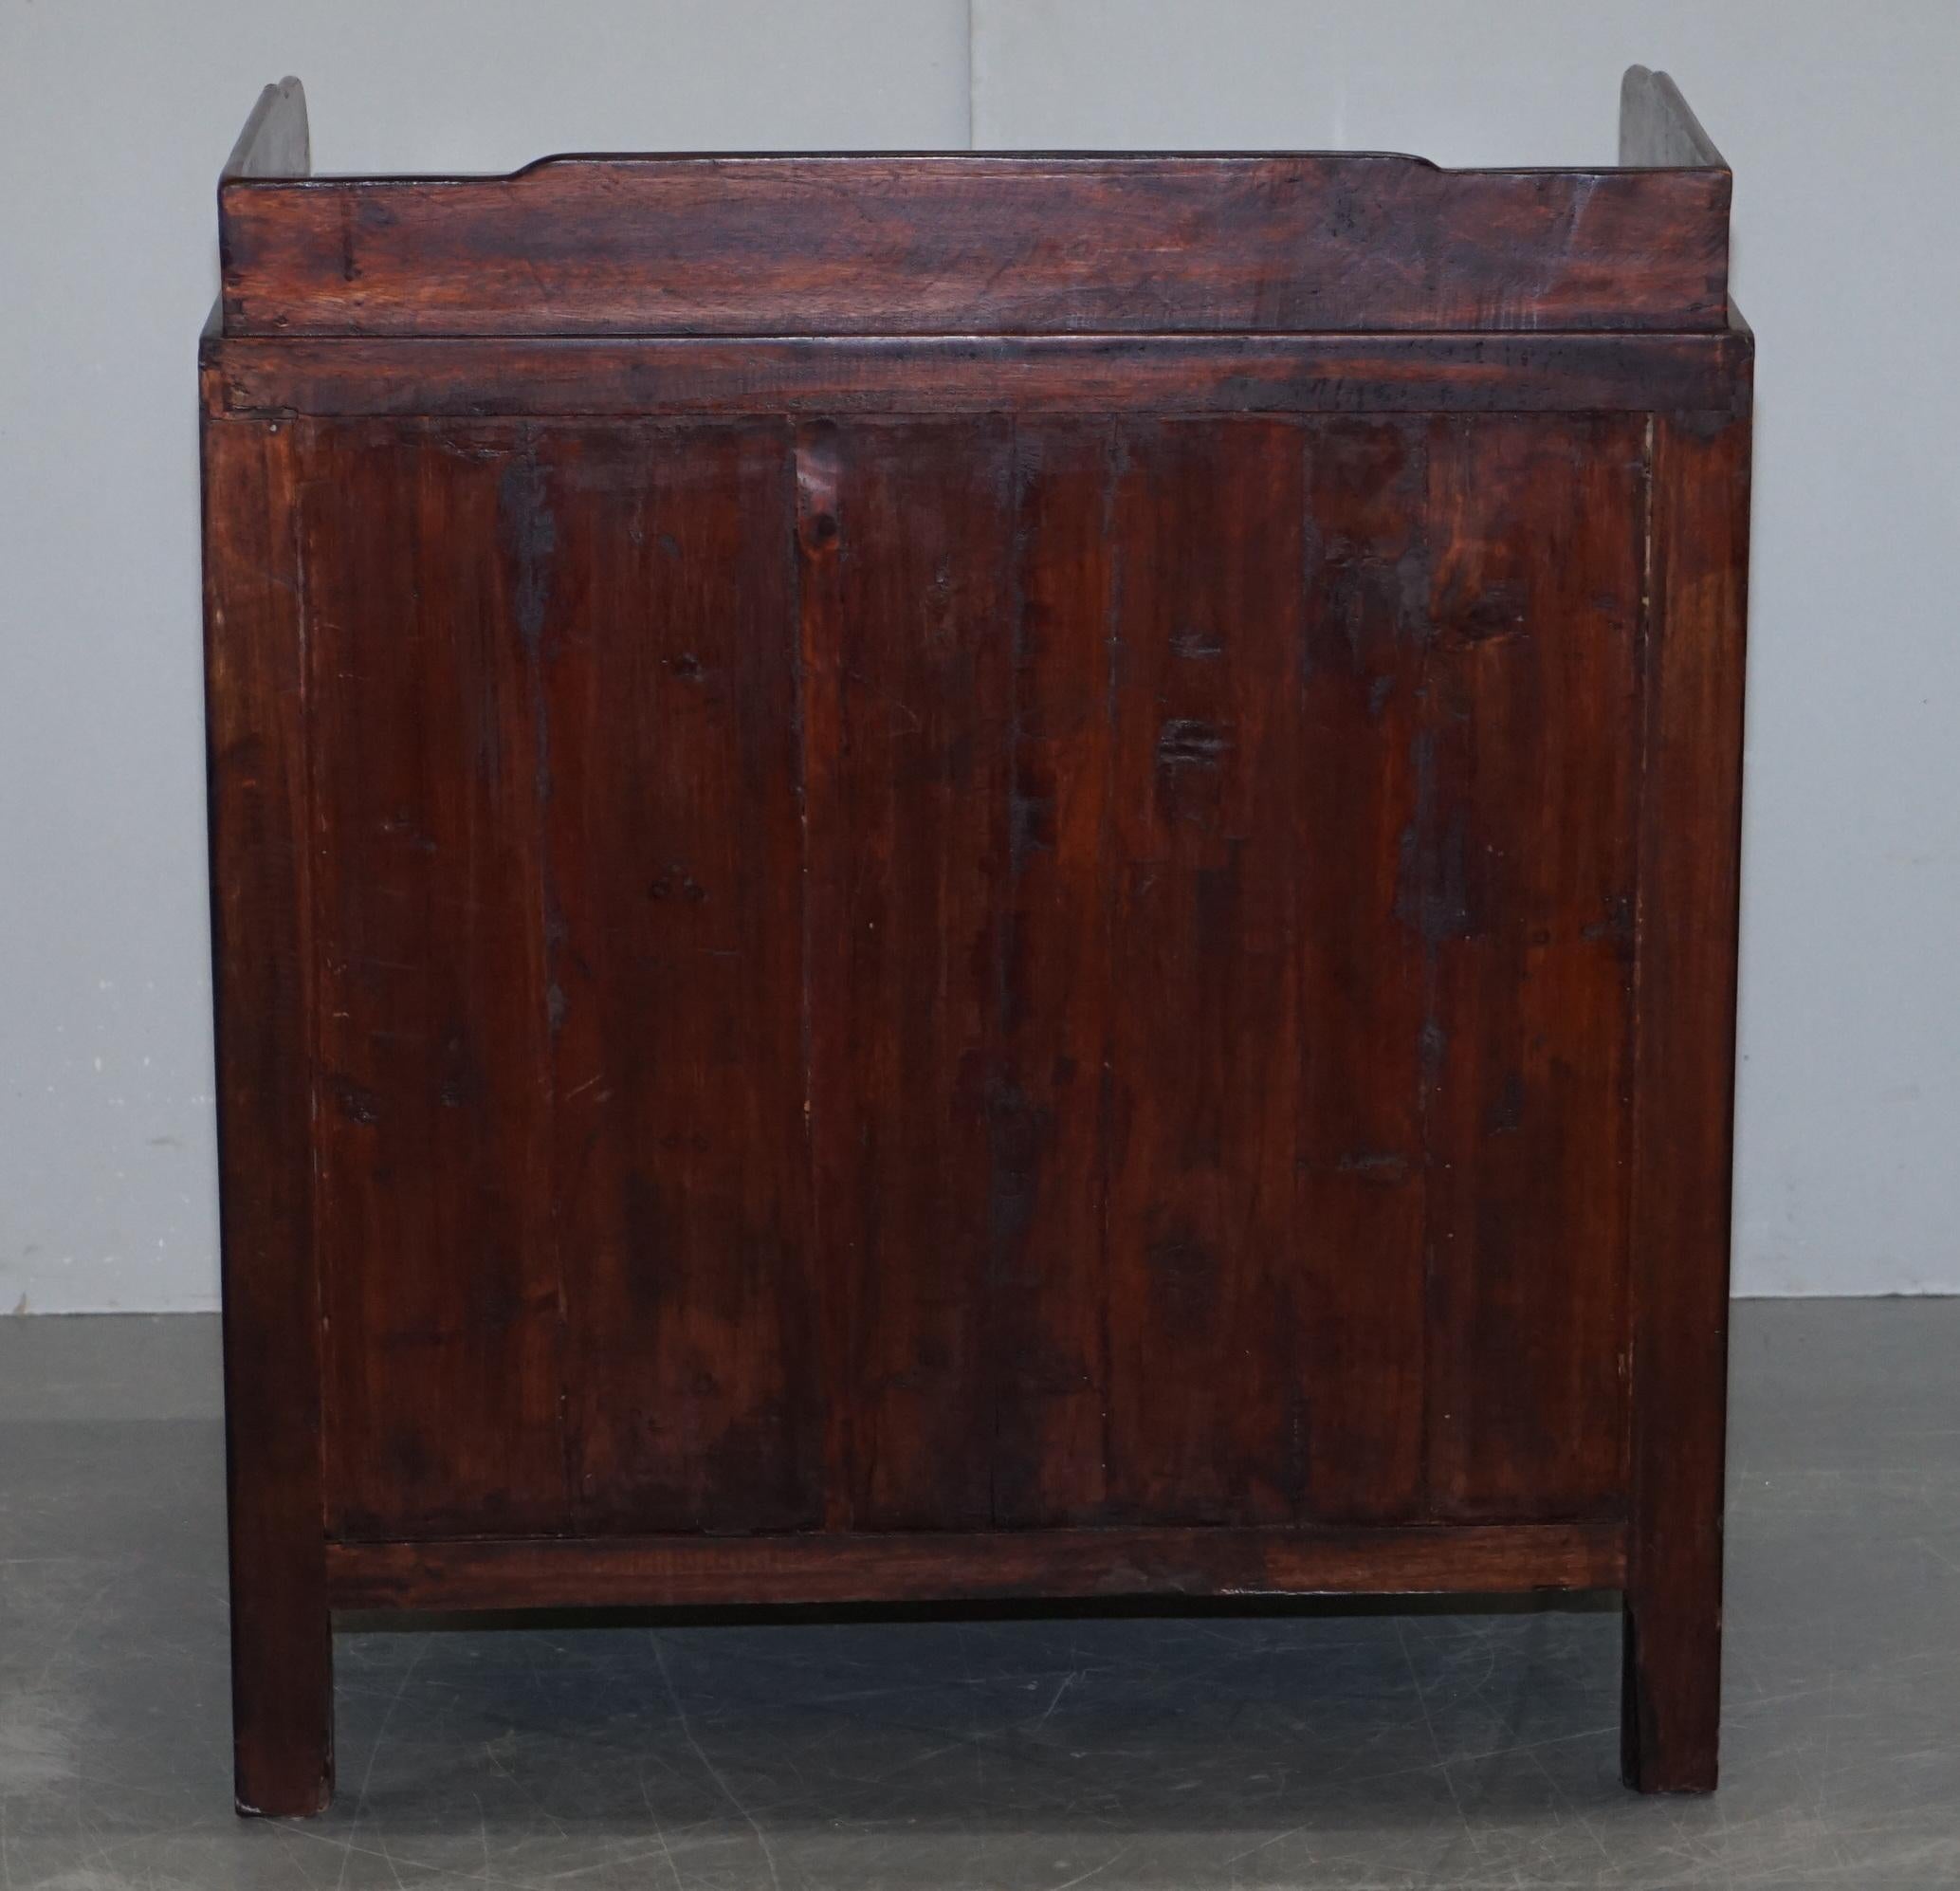 Antique Chinese Export circa 1900 Redwood Lacquered Inlaid Wash Stand Sideboard For Sale 2